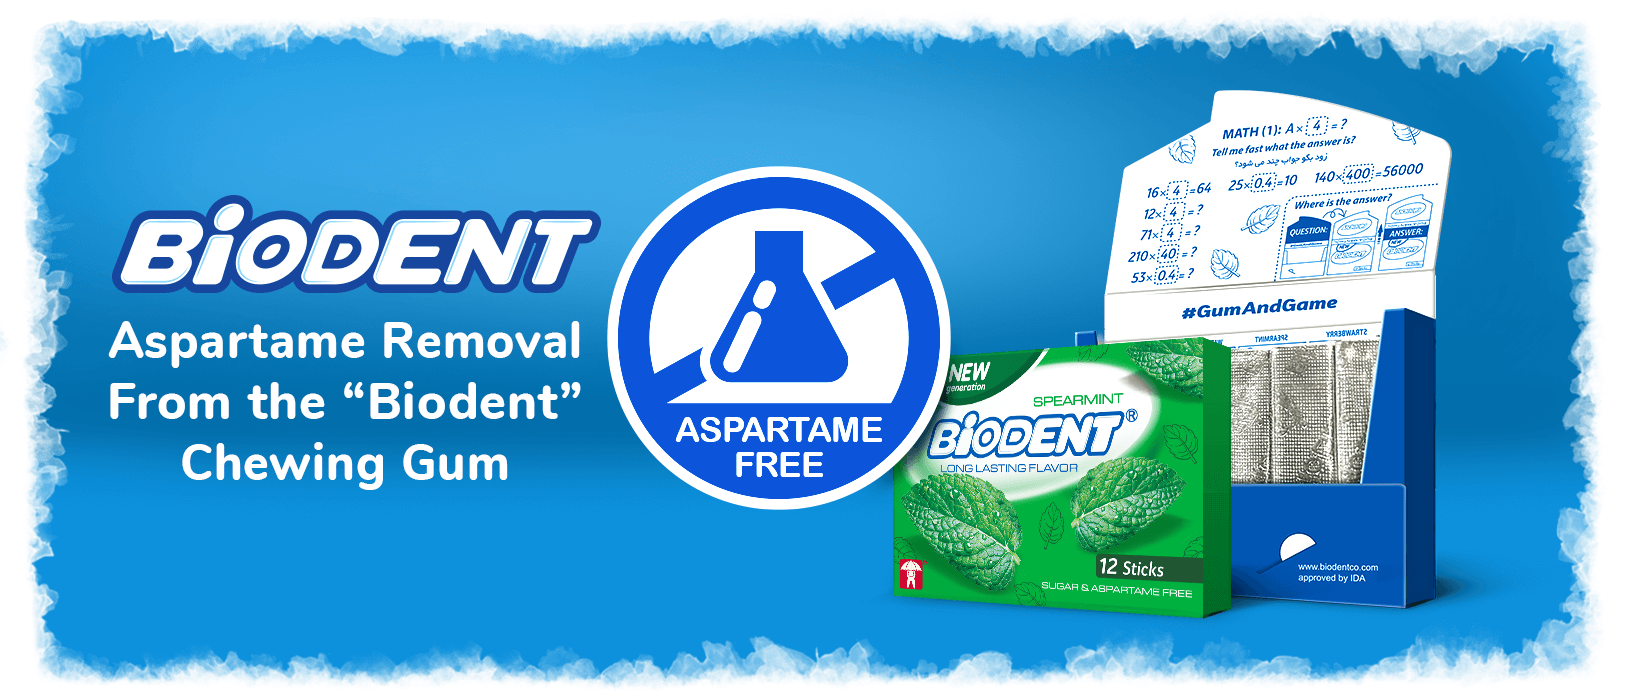 Aspartame Removal from Biodent Chewing Gum products